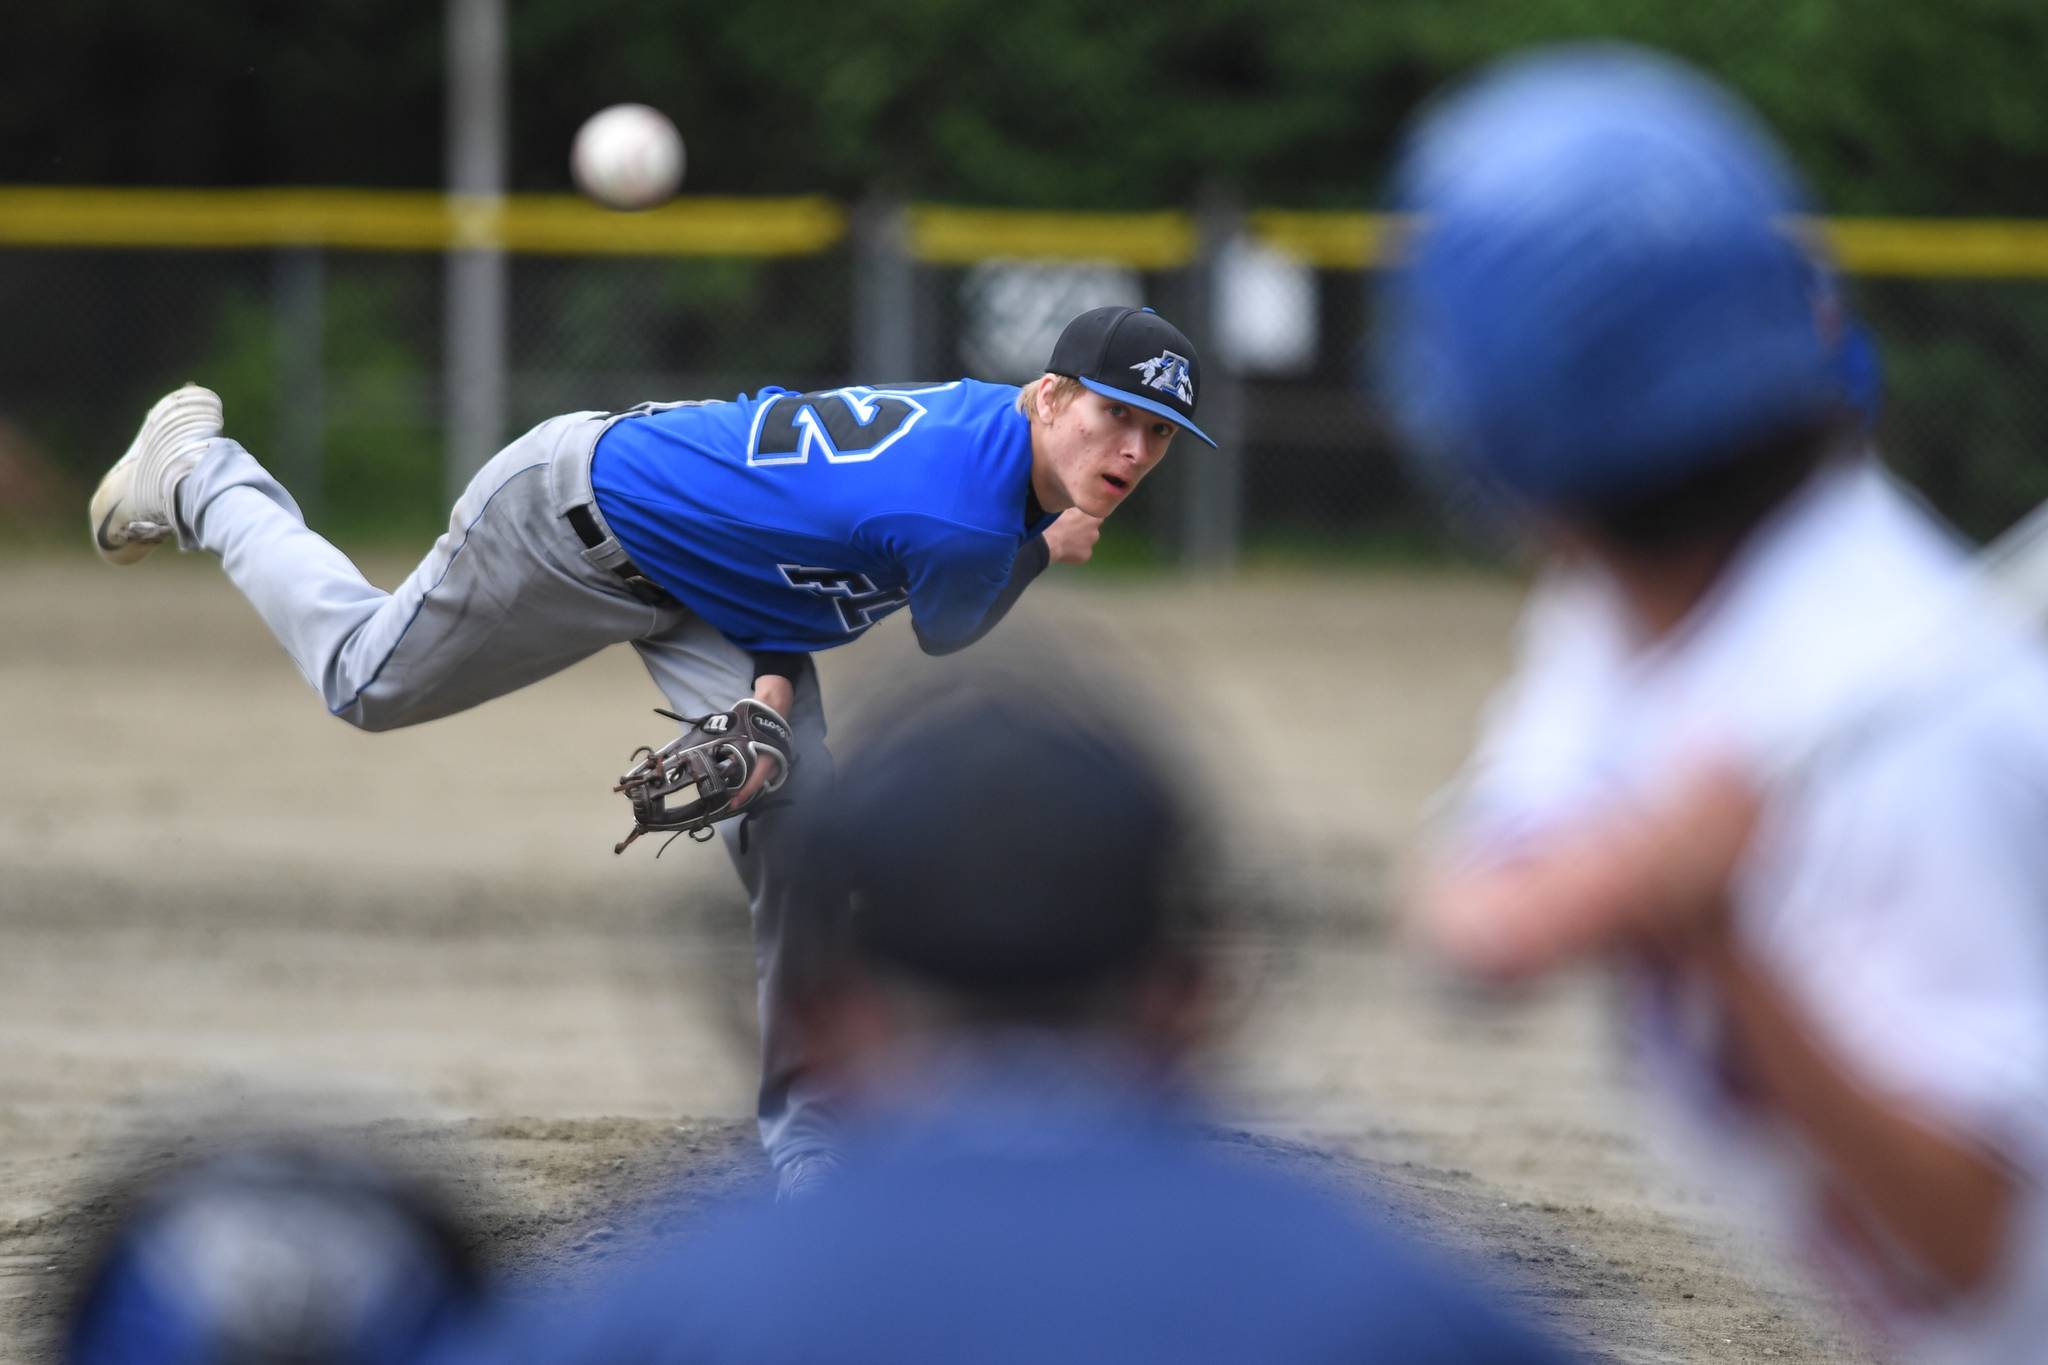 Thunder Mountain pitcher Stone Morgan delivers a pitch against Sitka at the Region V Baseball Championship at Adair-Kennedy Memorial Park on Friday, May 24, 2019. (Michael Penn | Juneau Empire)